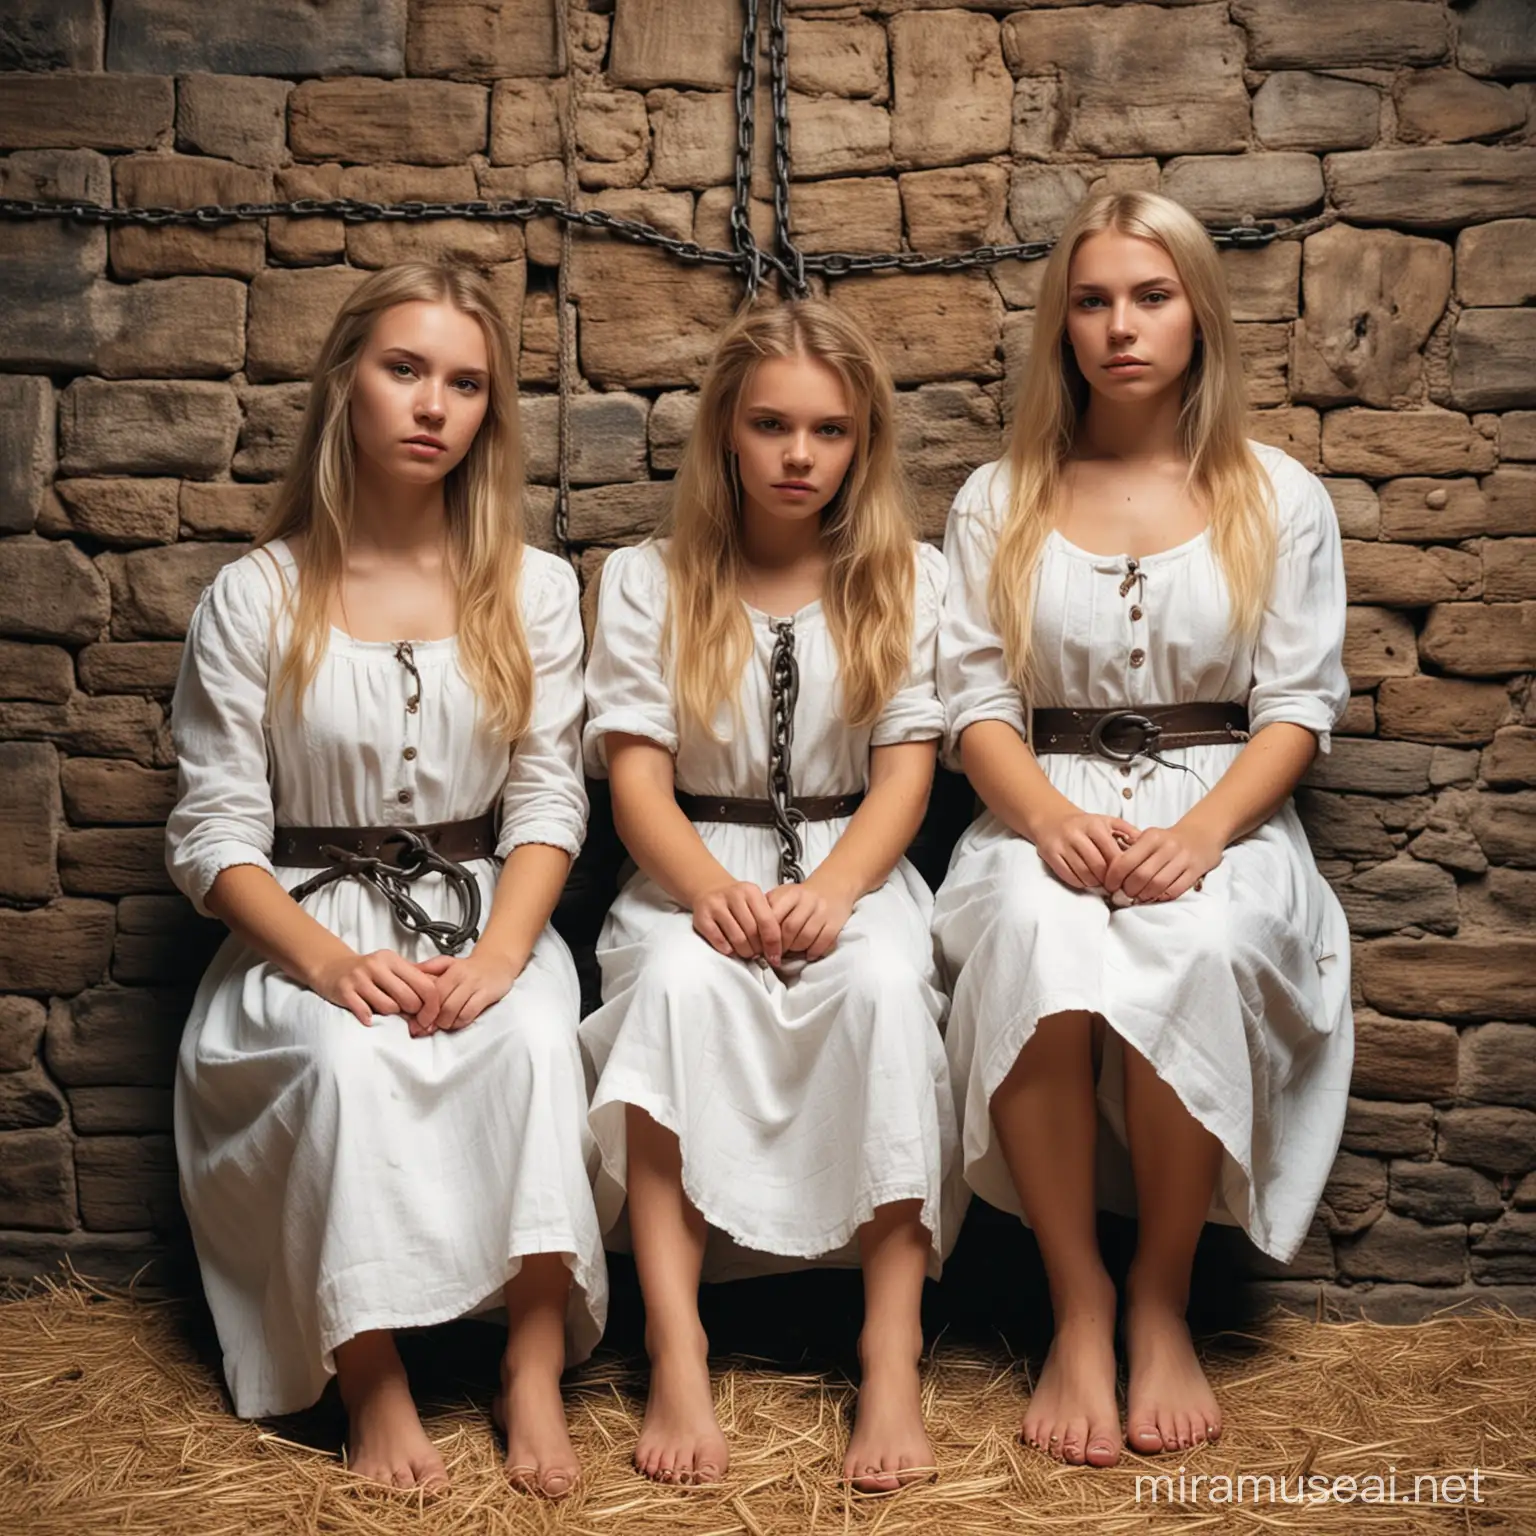 Two beautiful blonde young peasant girls chained to wall in medieval dungeon. They are sitting on hay. They are barefoot wearing peasant white simple dress. They look sad 